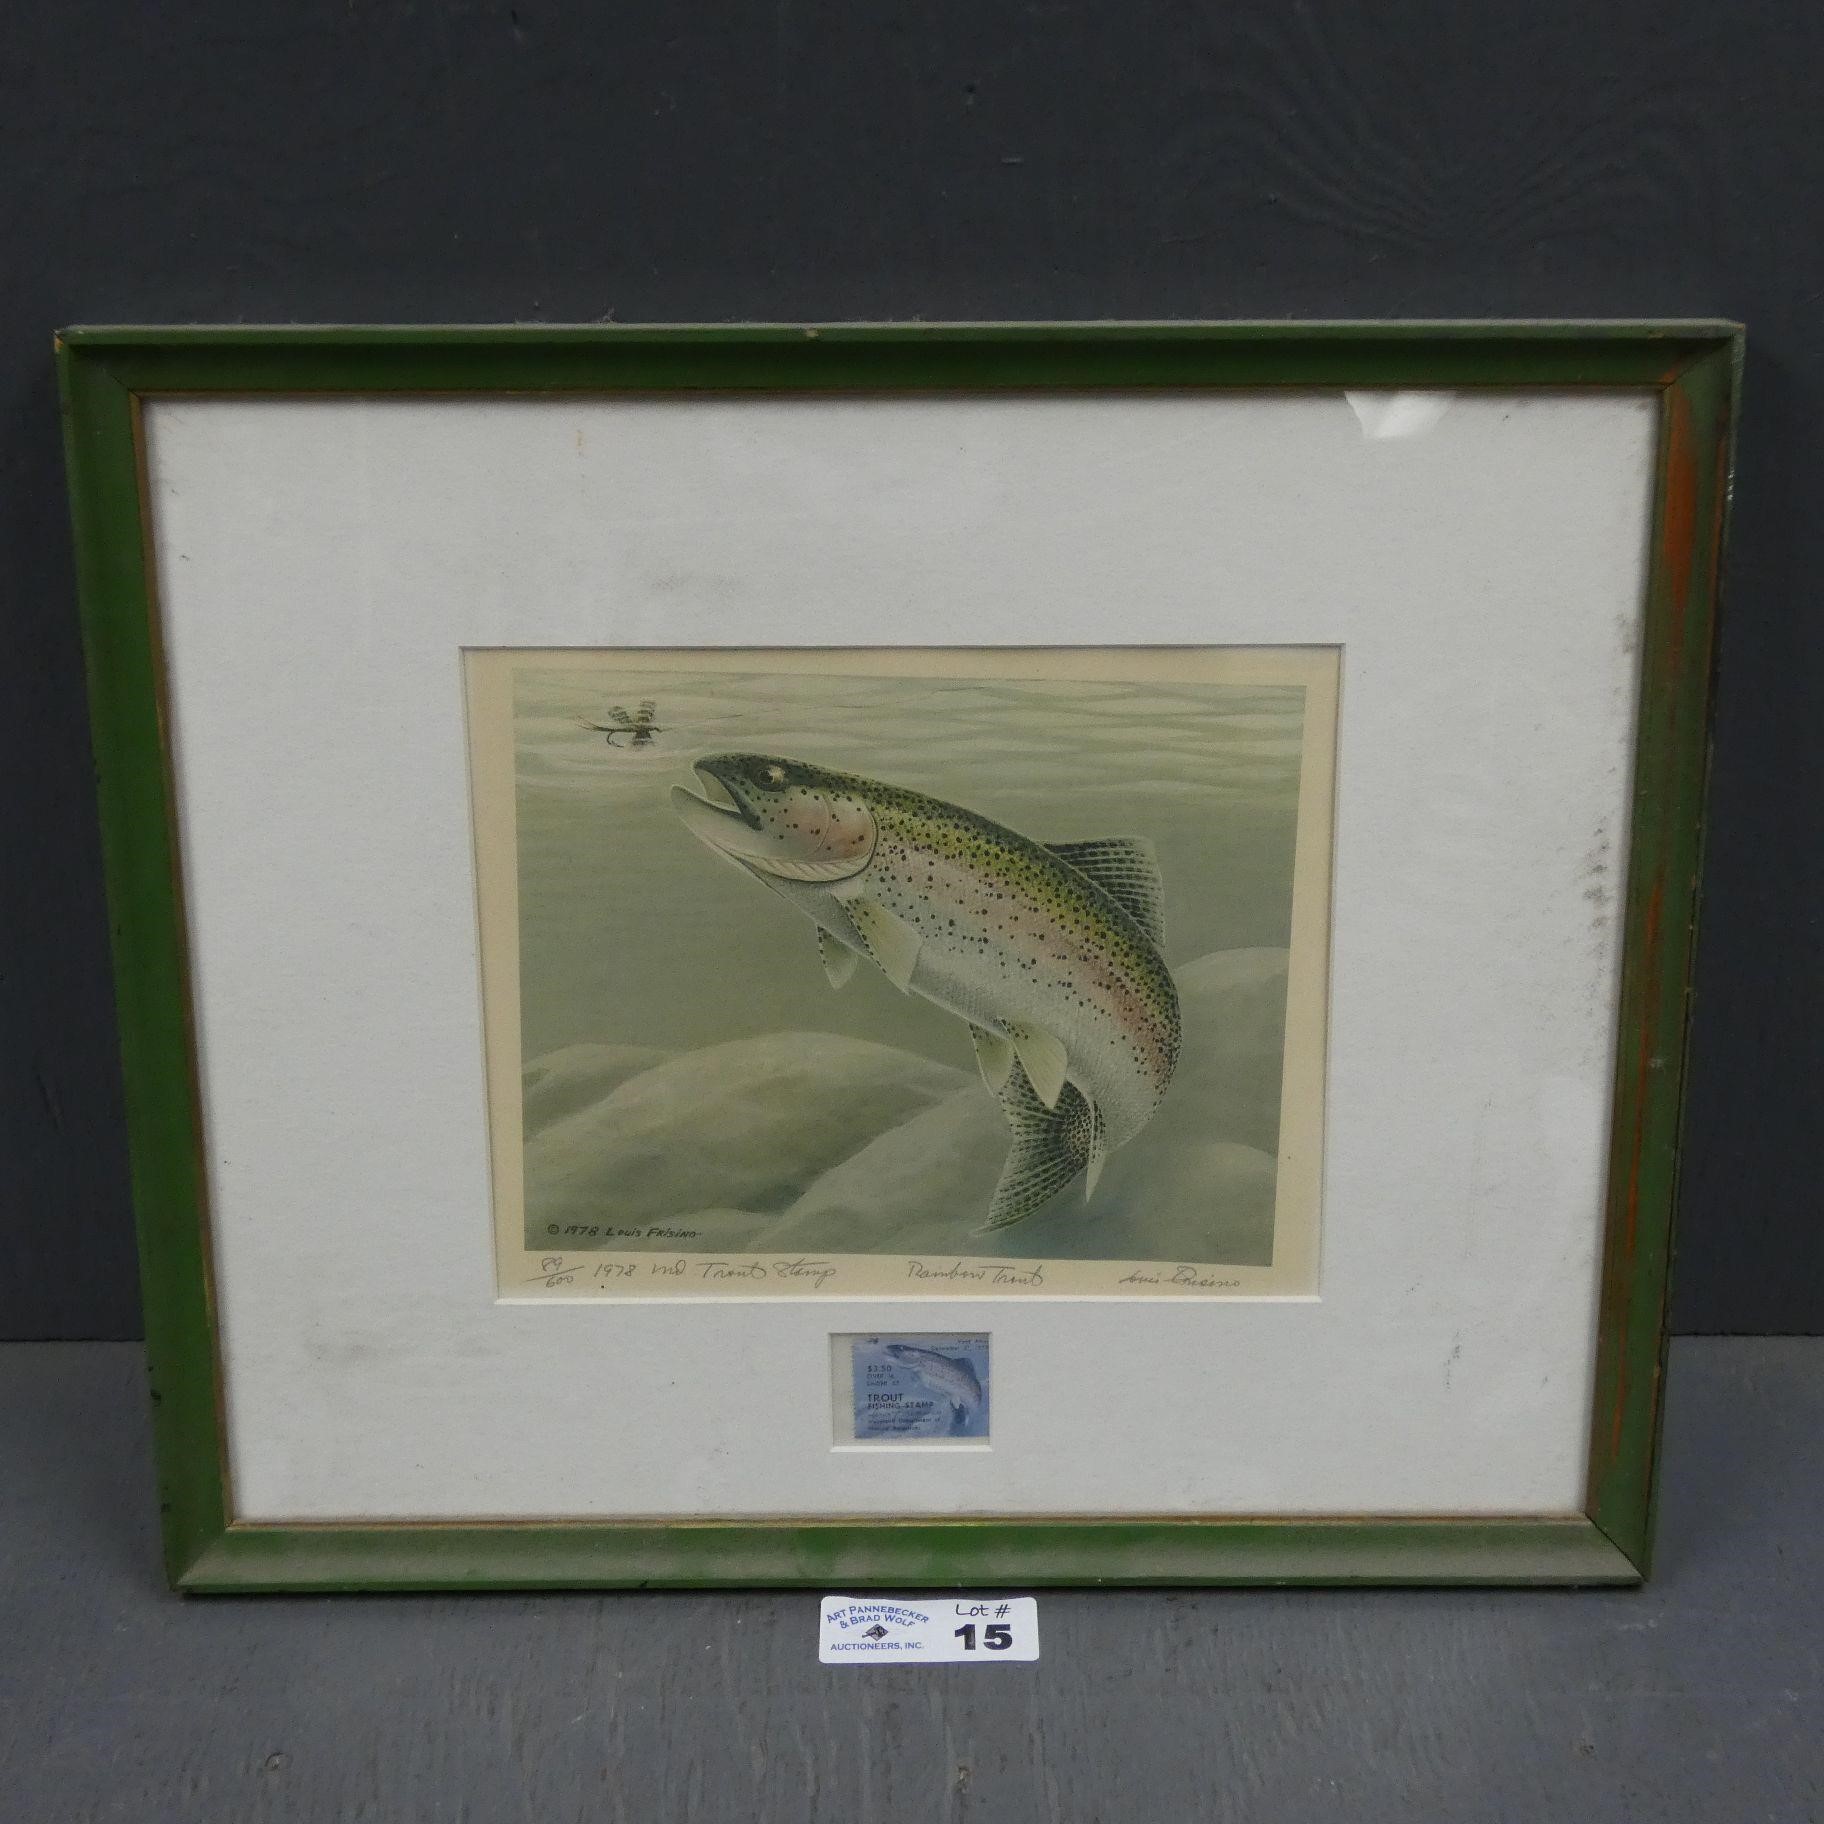 1978 Signed Louis Frisino Rainbow Trout Picture